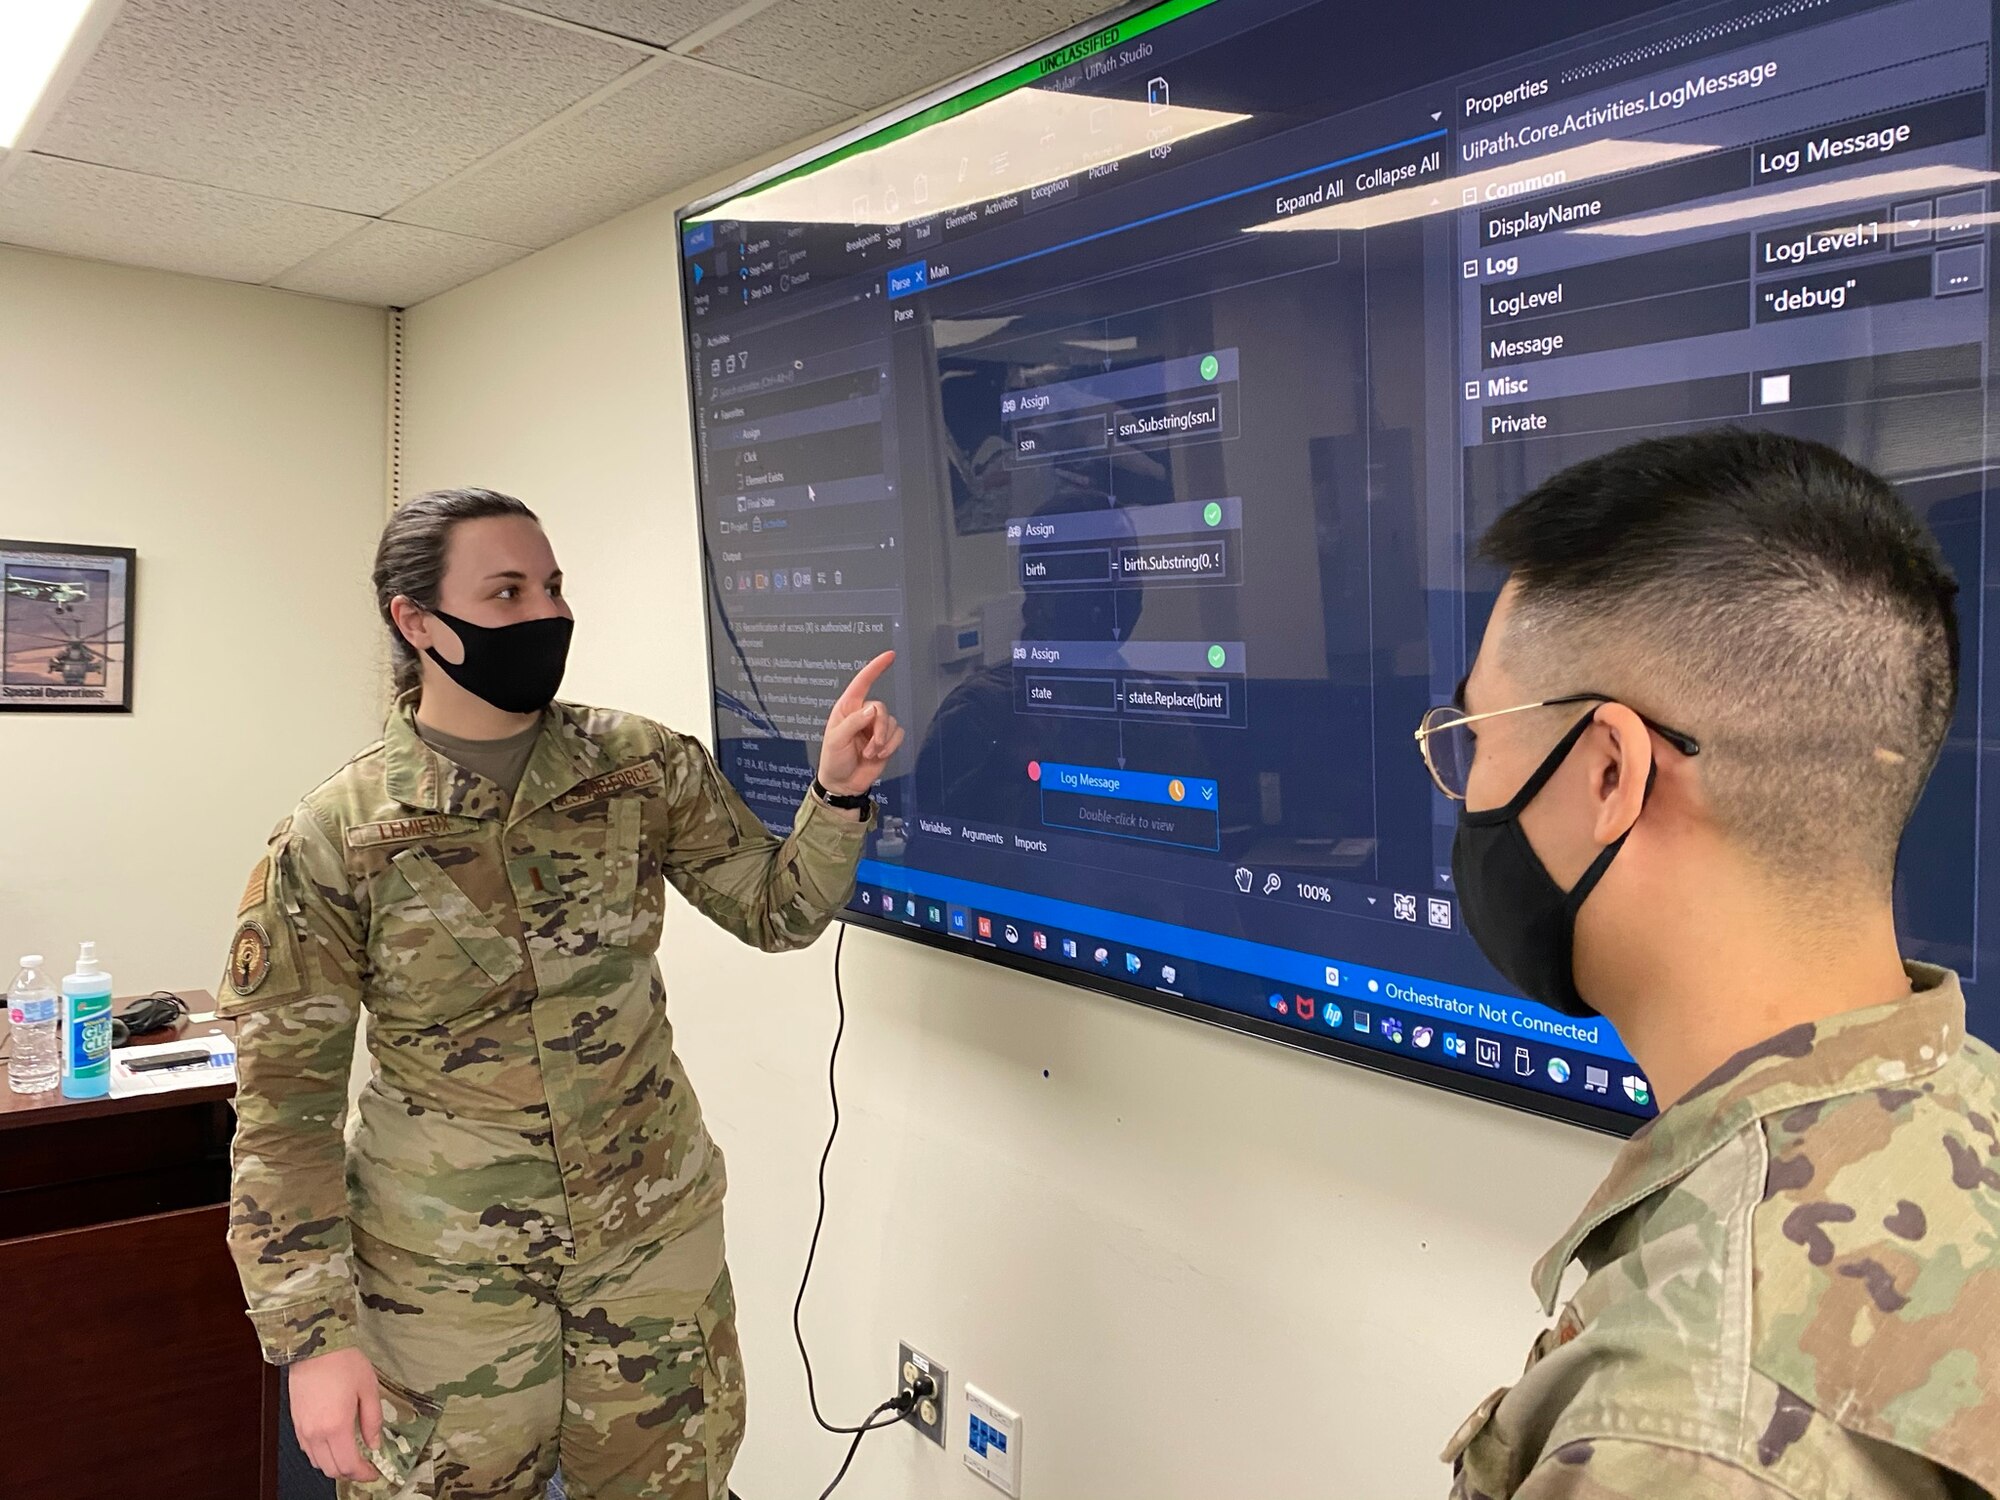 Second Lt. Arianna Lemieux examines UiPath's user interface and data processing steps with 1st Lt. Luke Chen in the collaborative classroom.